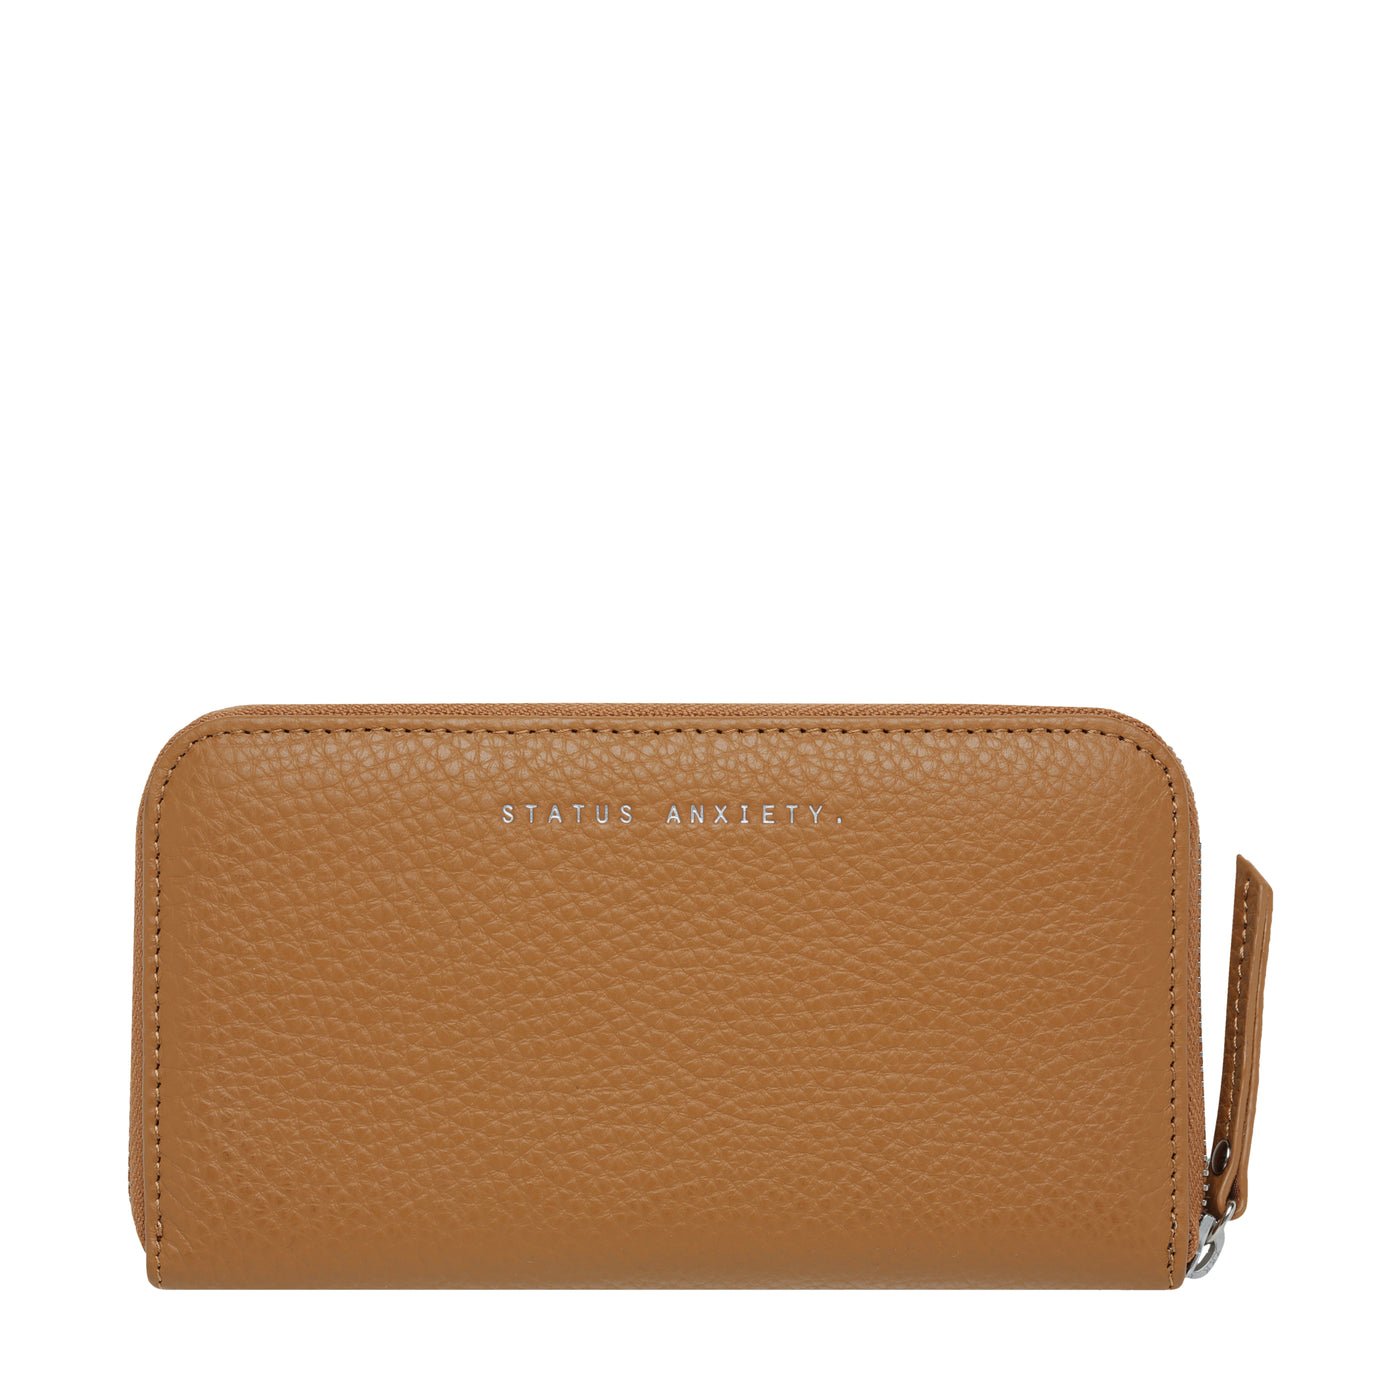 STATUS ANXIETY YET TO COME WALLET - TAN  The Status Anxiety Yet To Come Wallet is now available in Tan, and is a practical conveniently sized wallet for every day use.